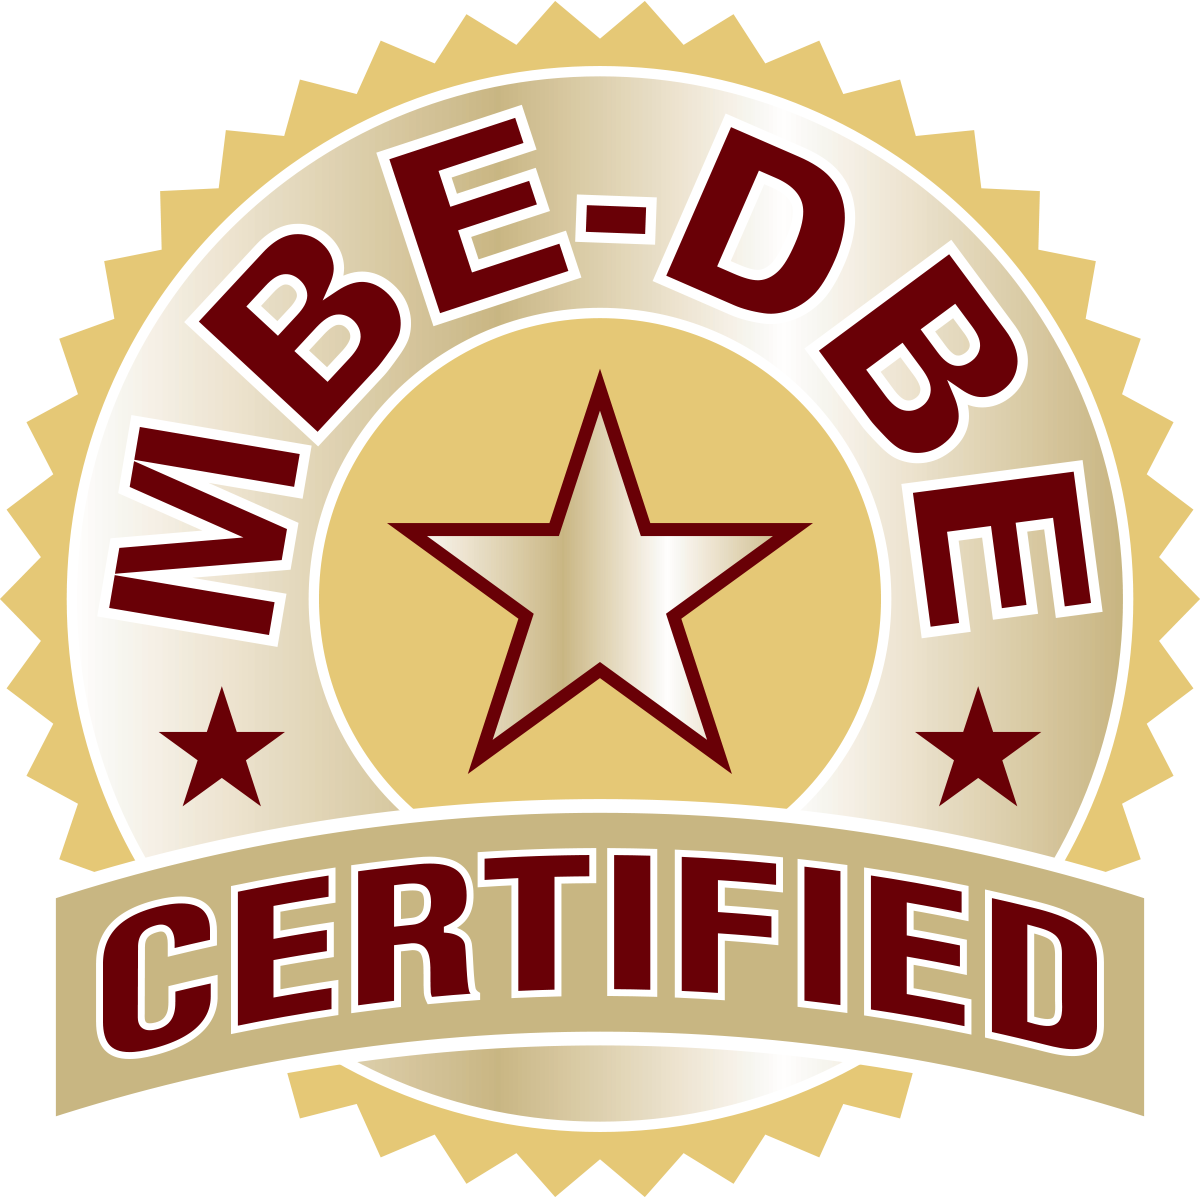 MBE & DBE certified